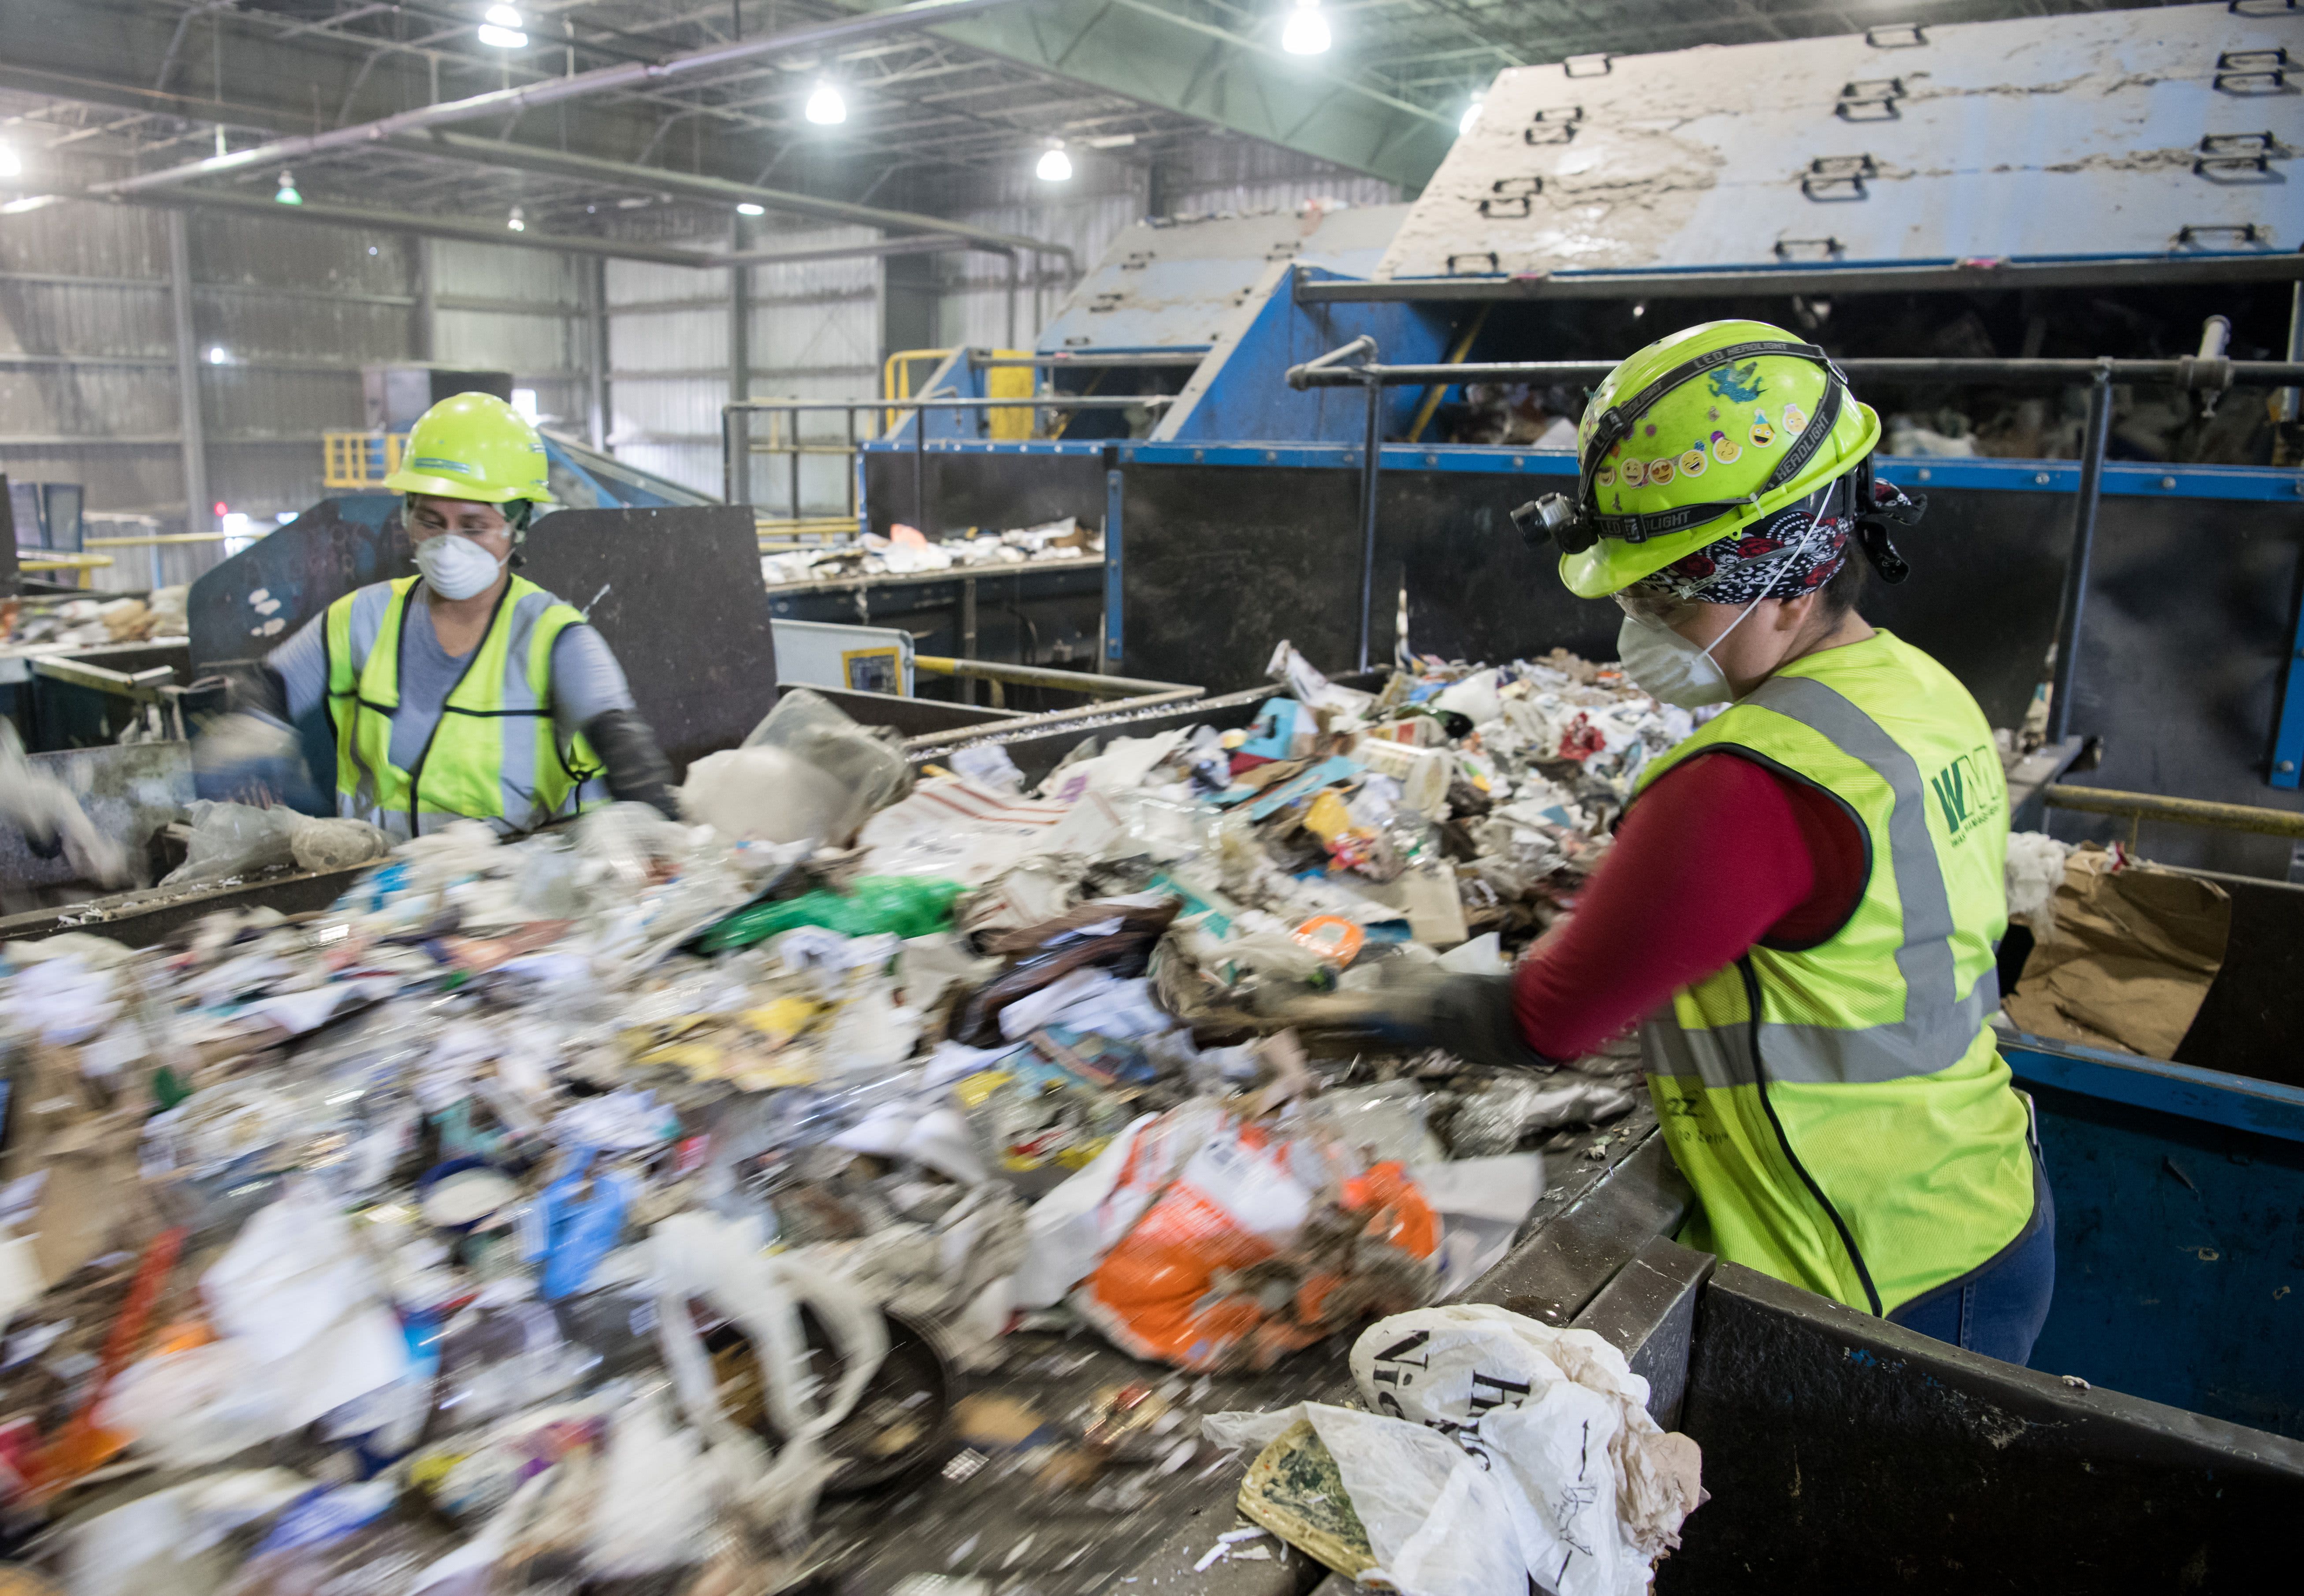 Waste Management CEO Jim Fish touts ‘pretty darned robust’ 2022 outlook